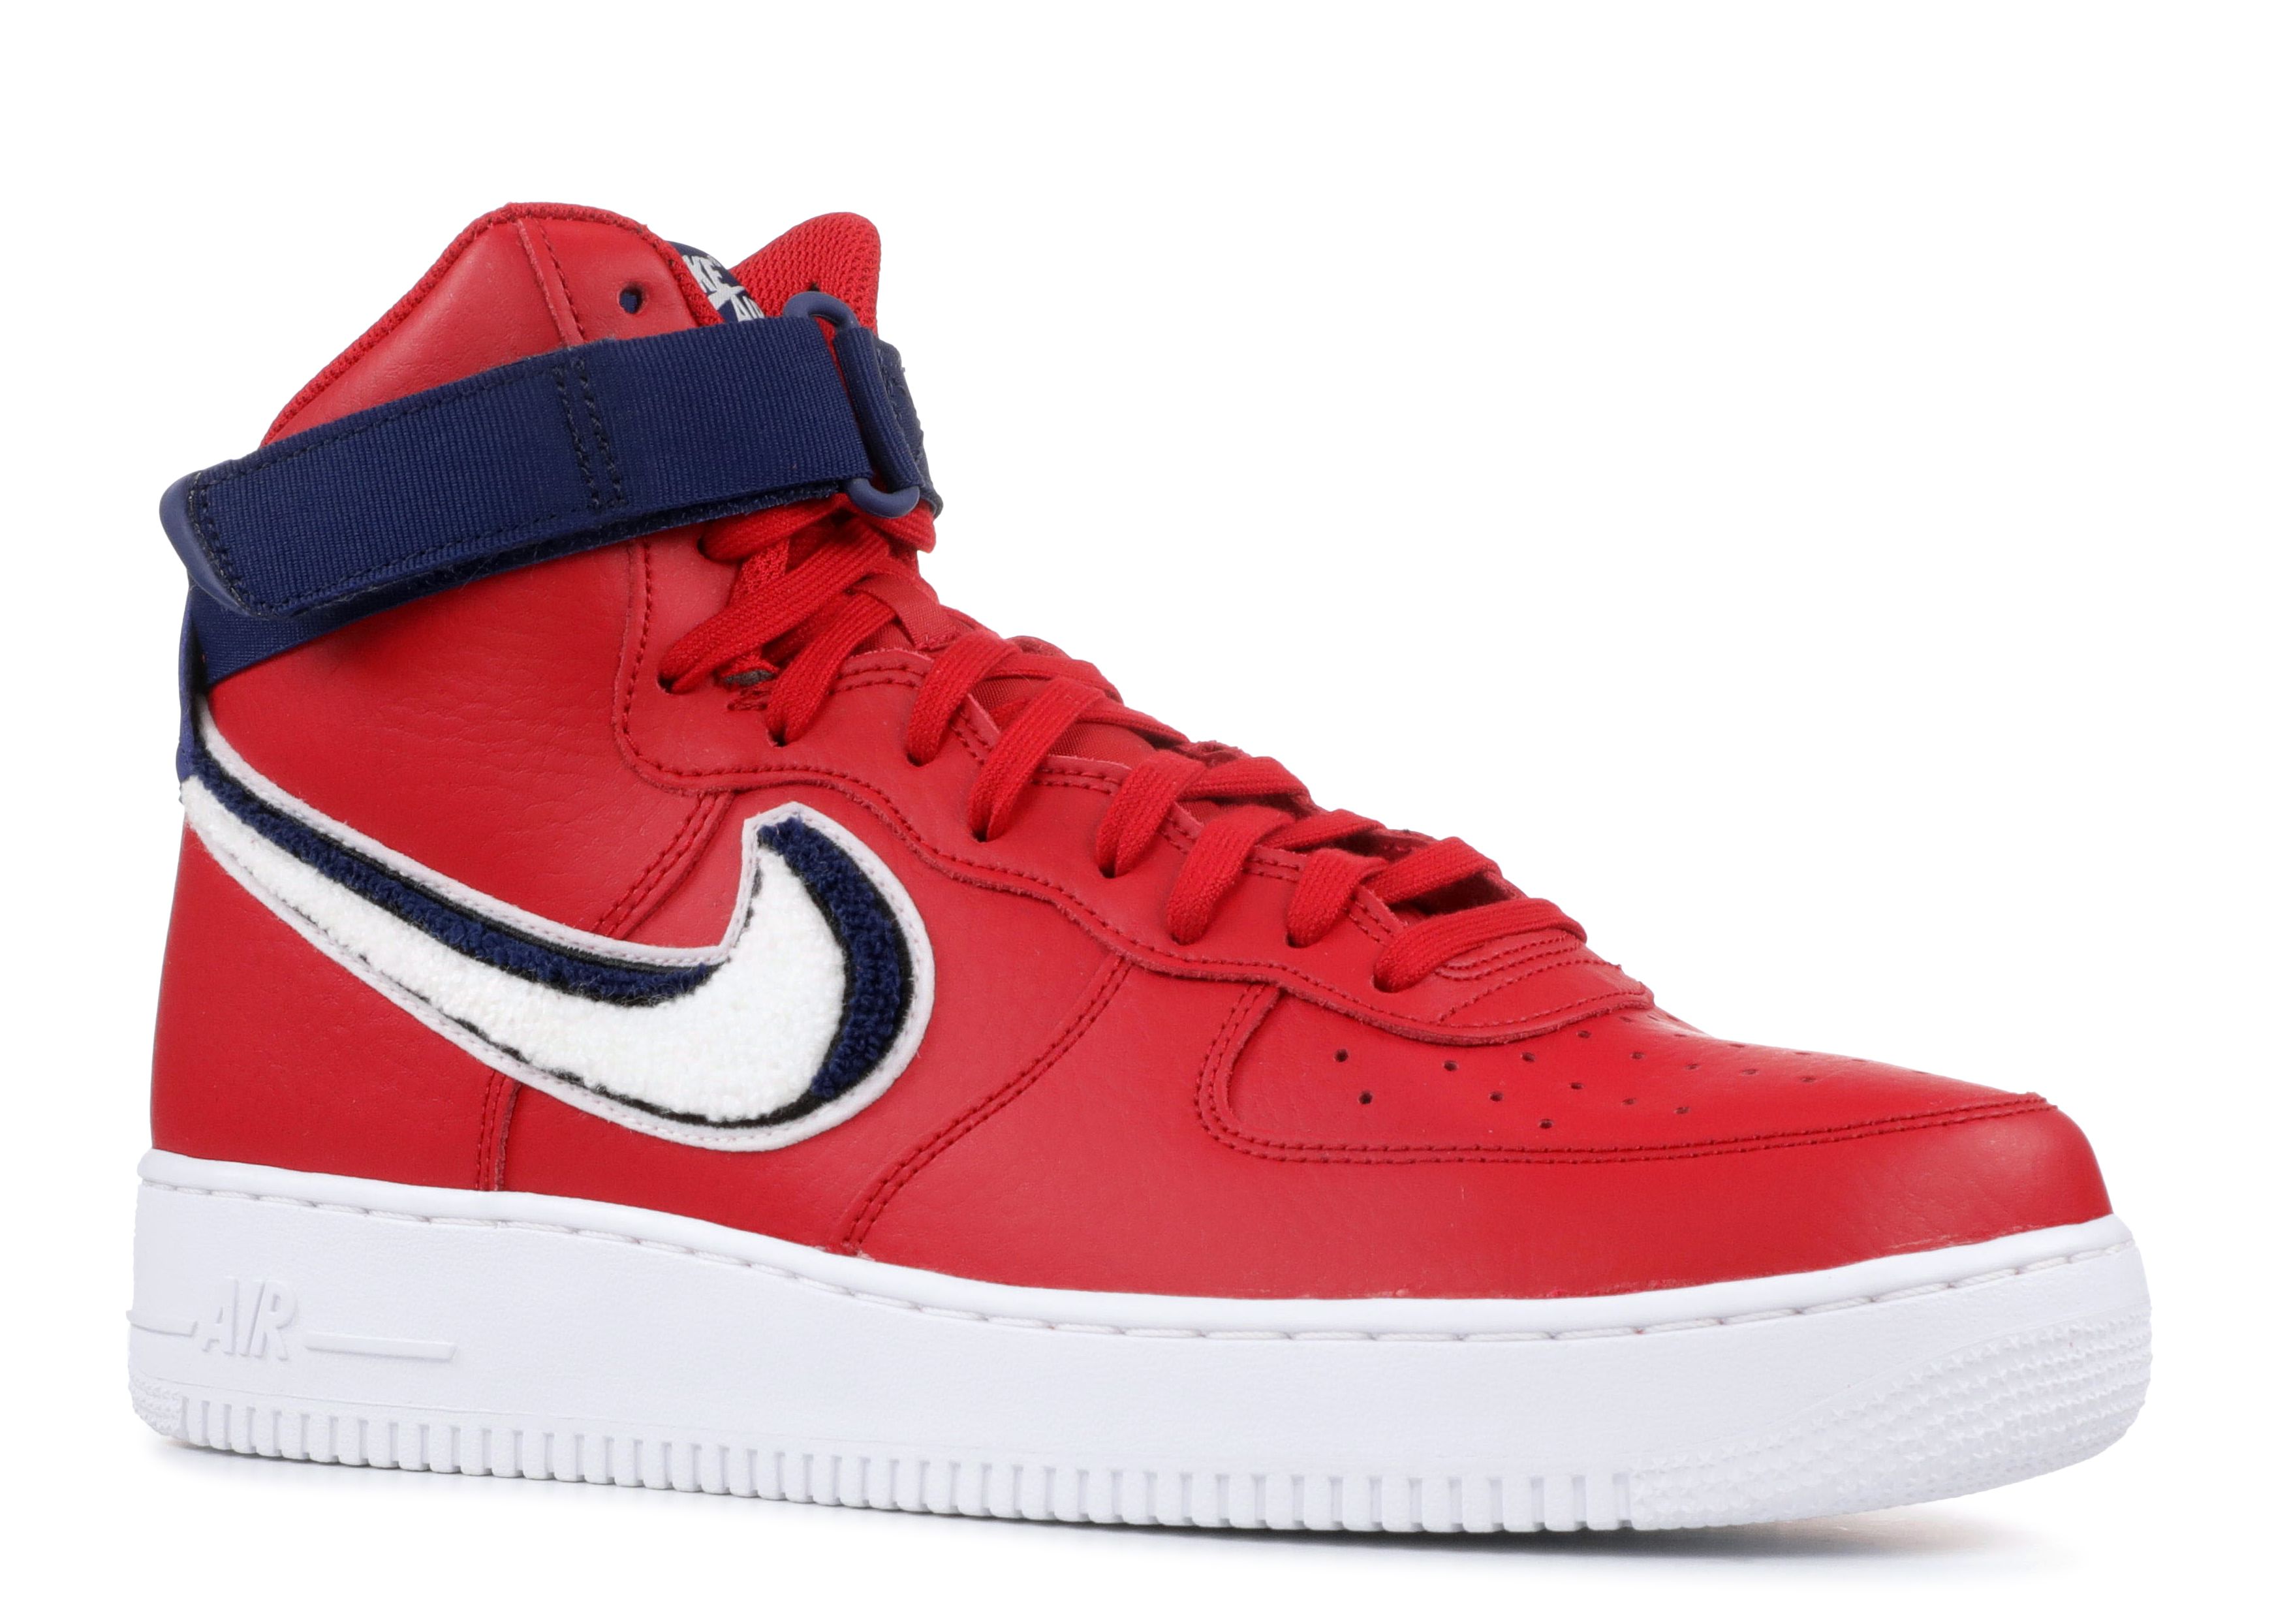 Nike Air Force 1 High '07 LV8 Red 2018